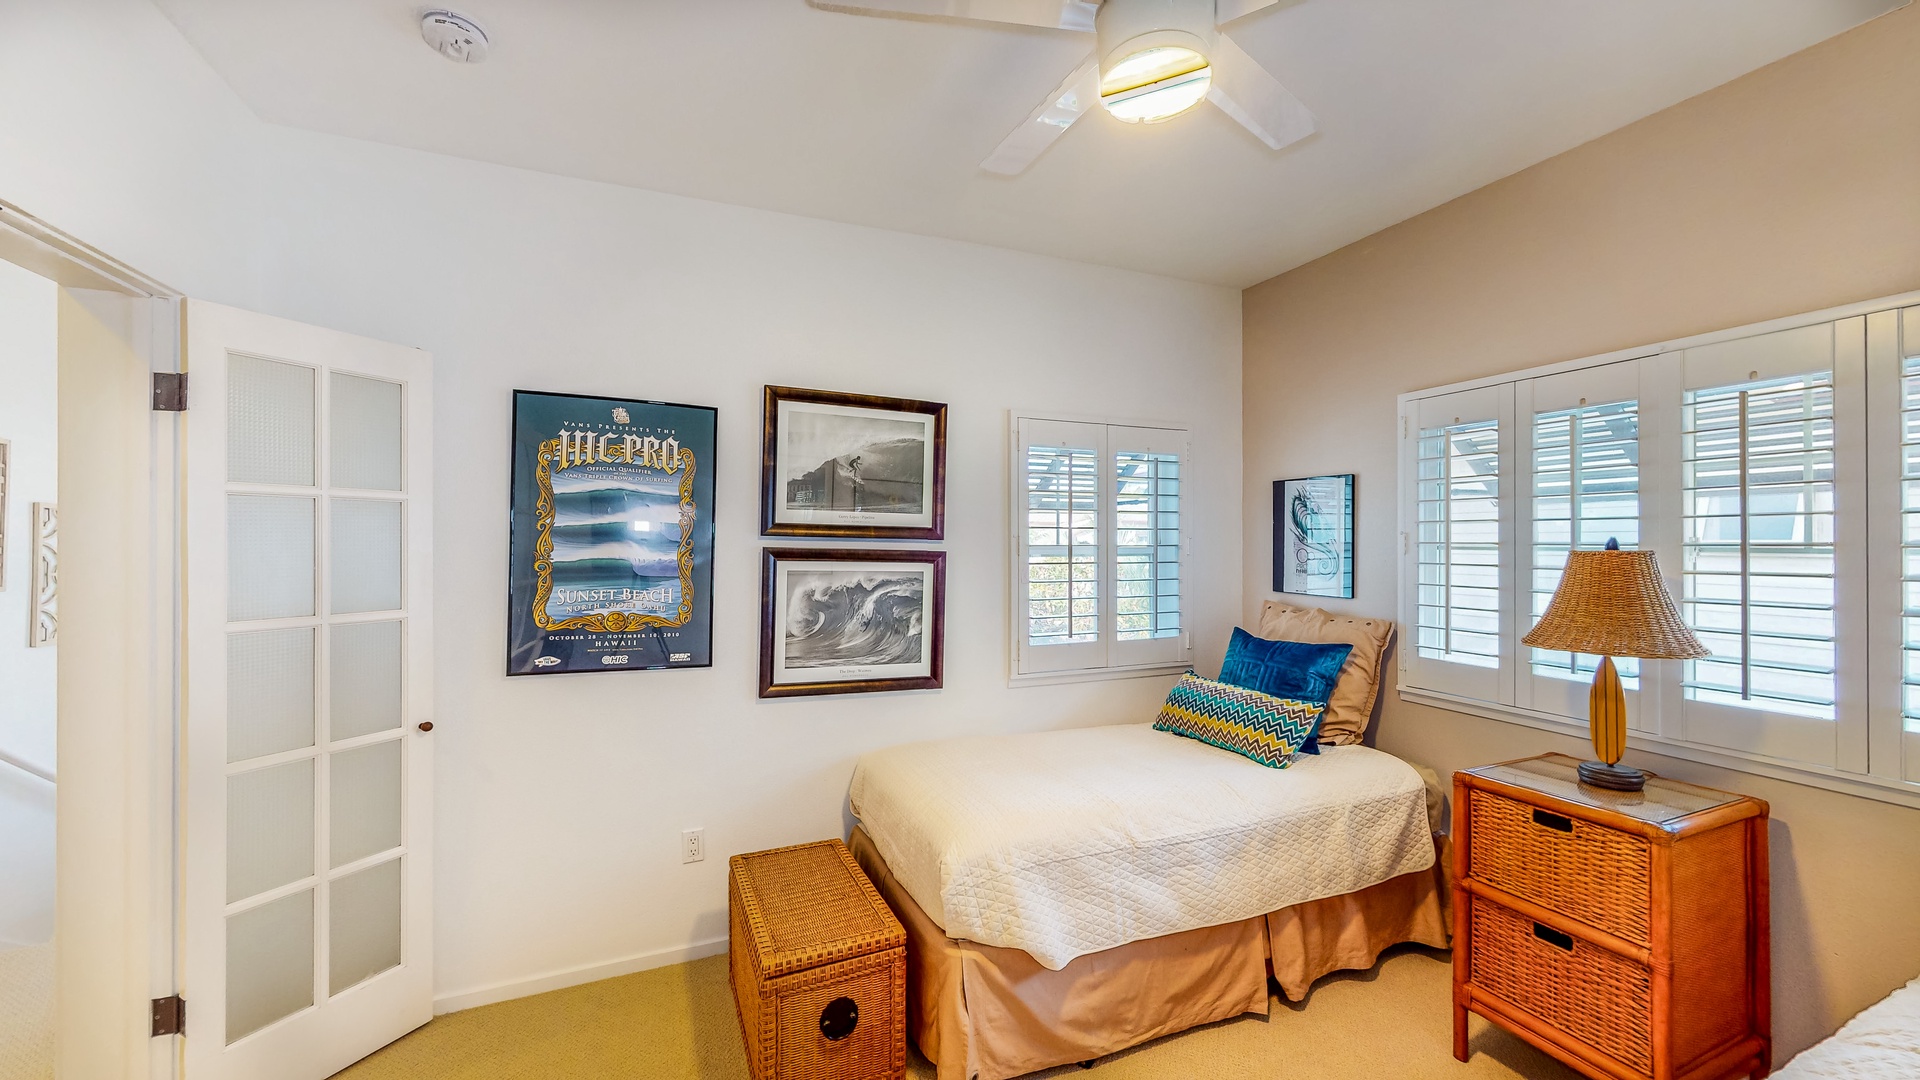 Kapolei Vacation Rentals, Coconut Plantation 1074-1 - The fourth guest bedroom with framed art.